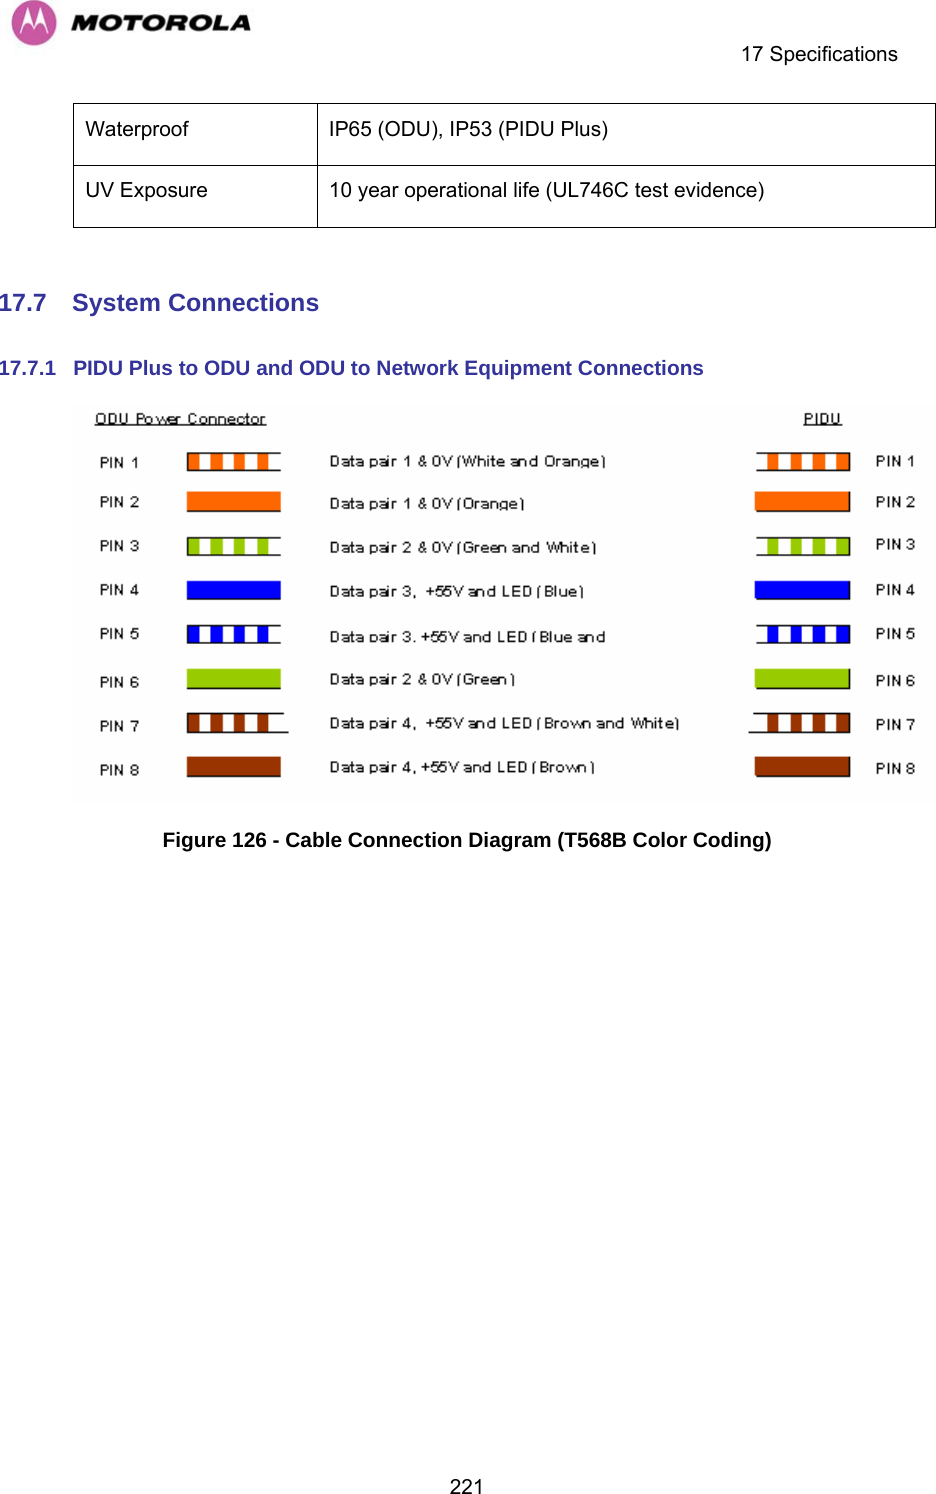    17 Specifications  221Waterproof   IP65 (ODU), IP53 (PIDU Plus) UV Exposure   10 year operational life (UL746C test evidence)   17.7  System Connections  17.7.1  PIDU Plus to ODU and ODU to Network Equipment Connections  Figure 126 - Cable Connection Diagram (T568B Color Coding) 